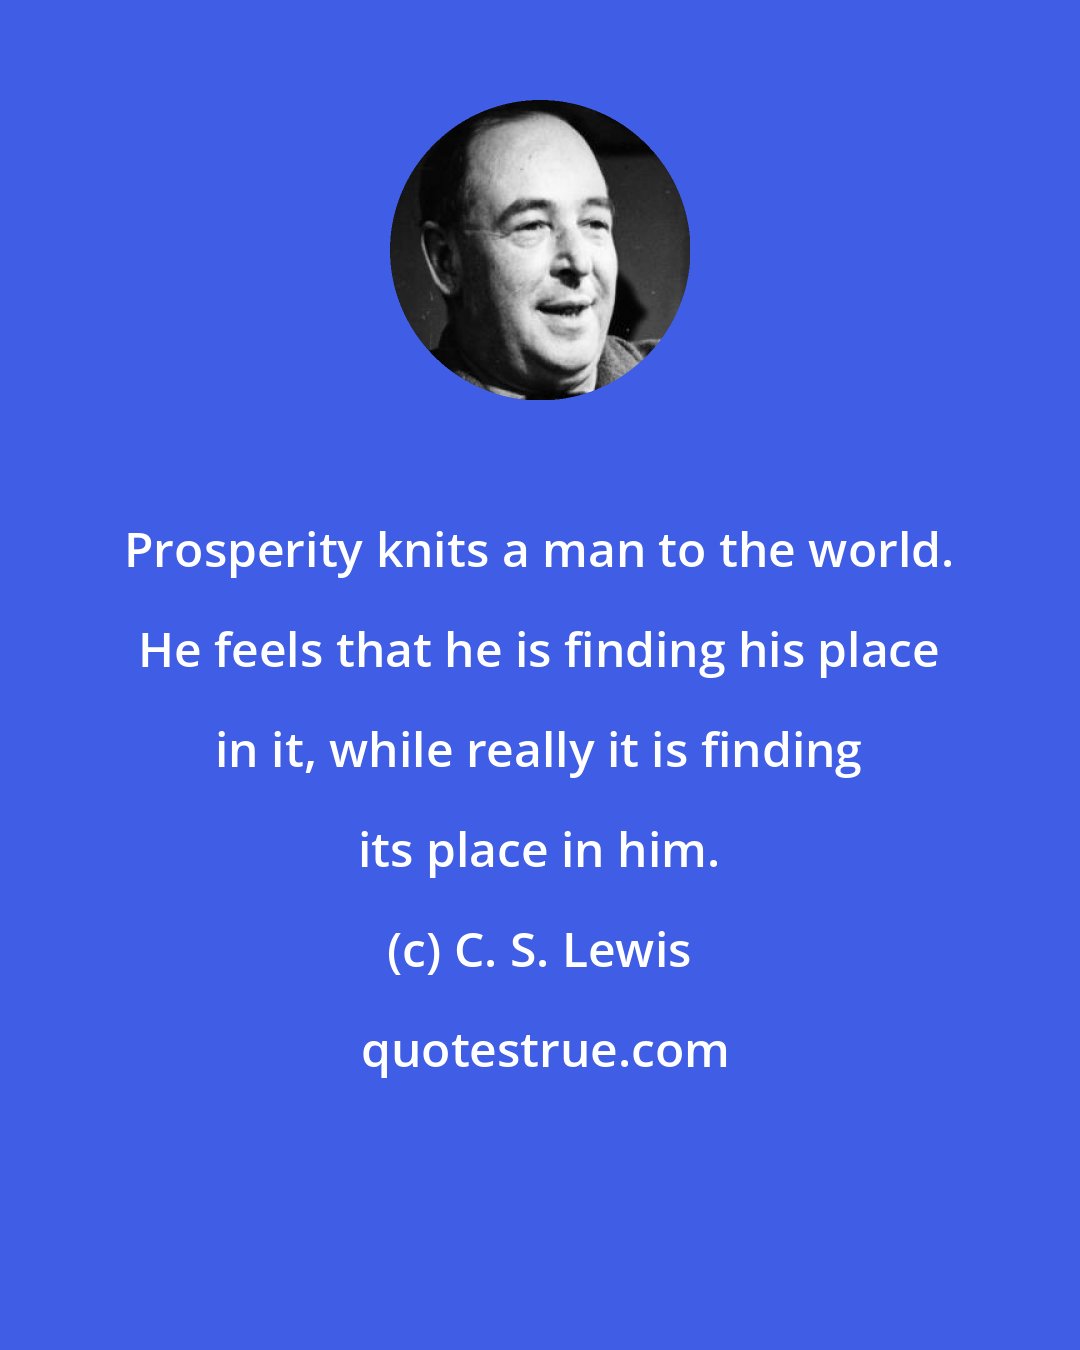 C. S. Lewis: Prosperity knits a man to the world. He feels that he is finding his place in it, while really it is finding its place in him.